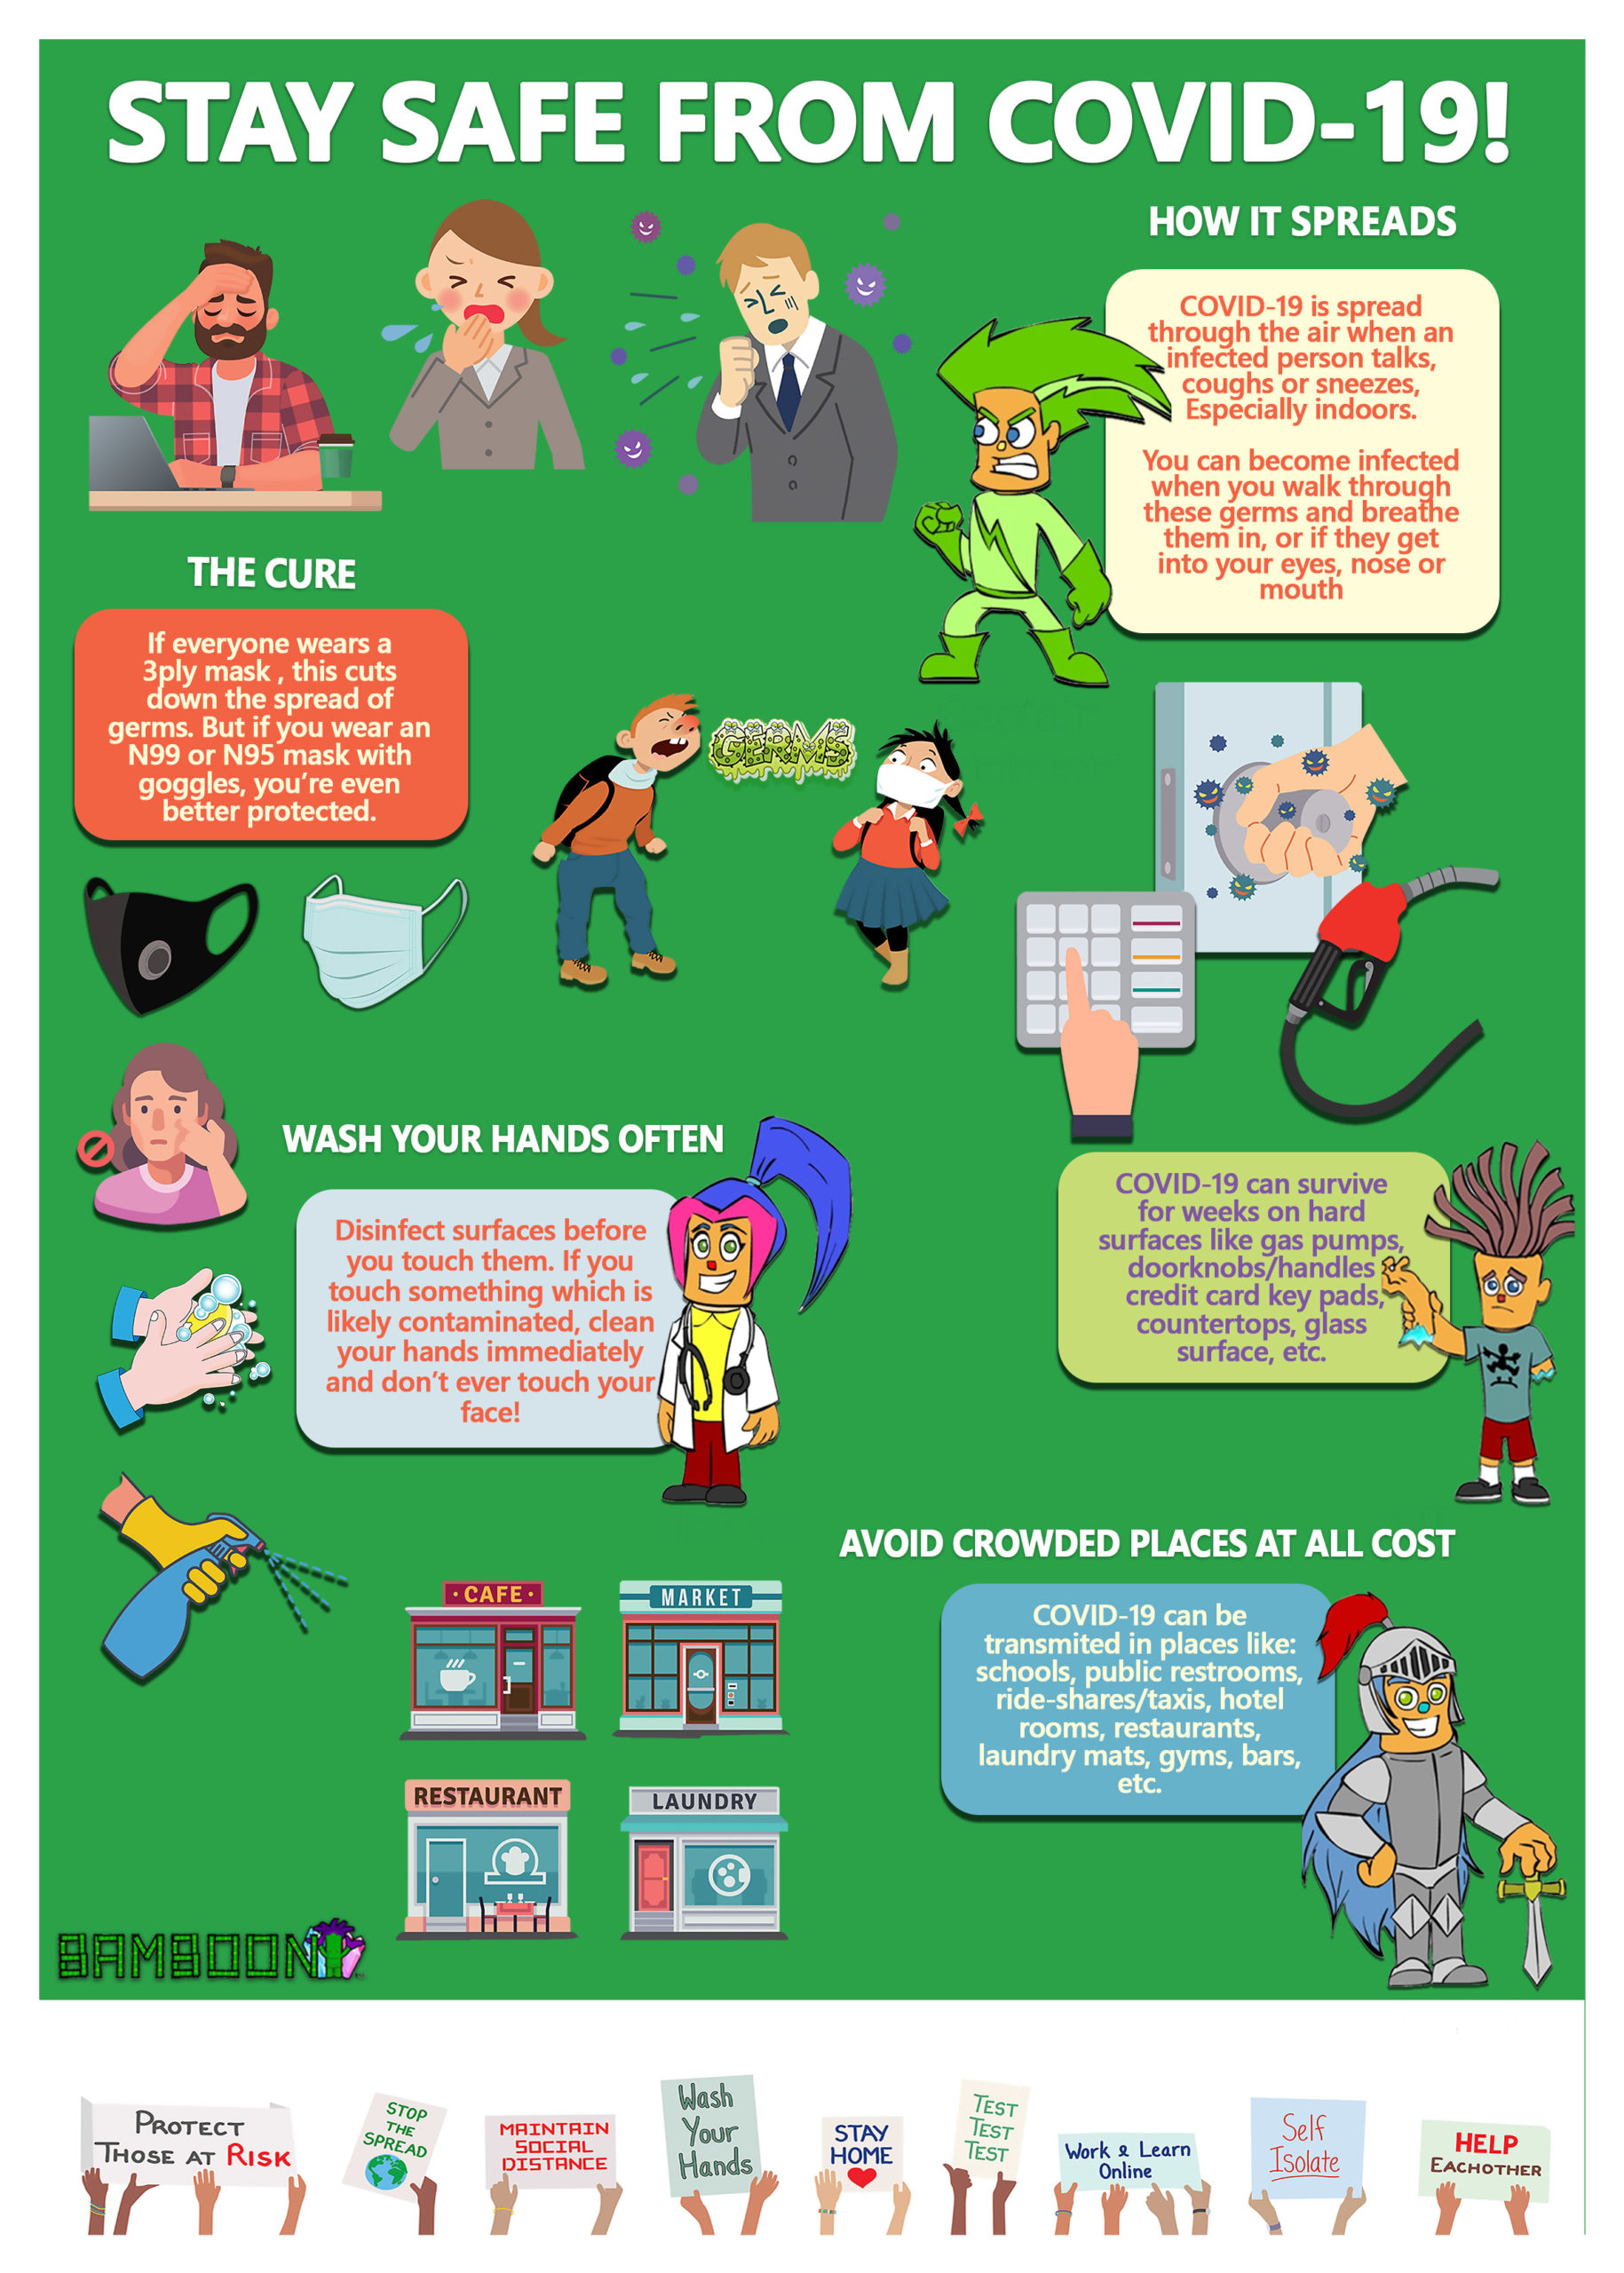 Print this FREE Covid-19 Prevention Poster